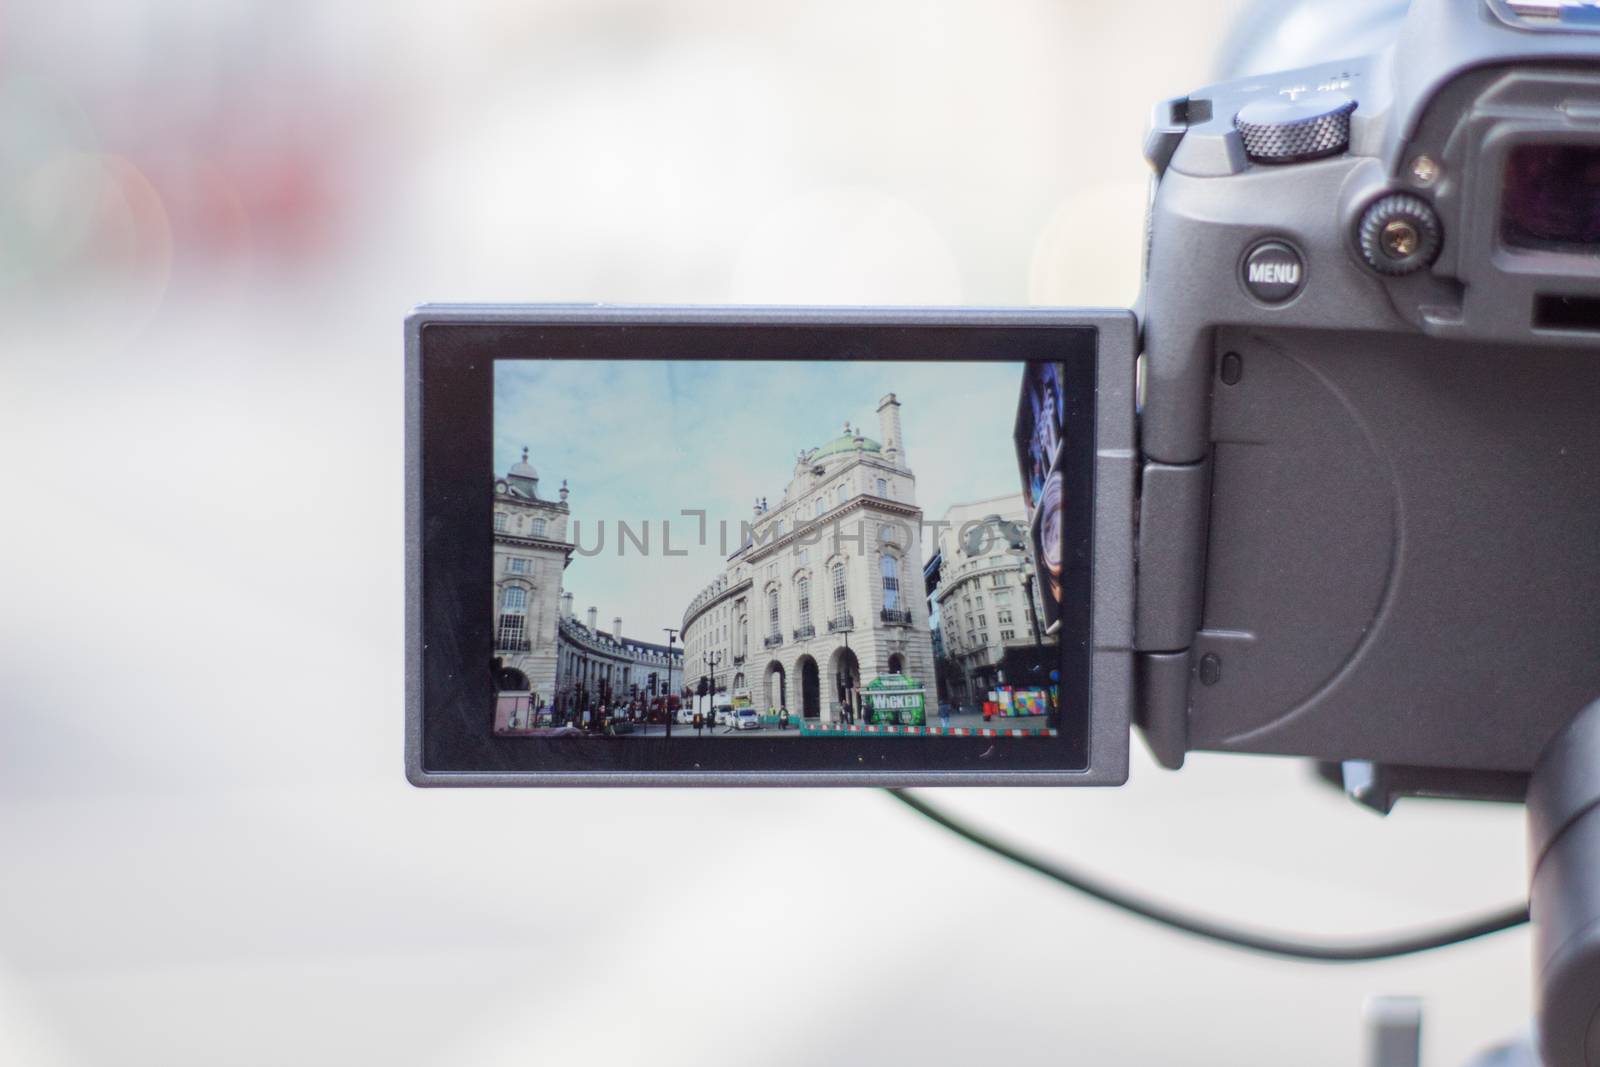 London, UK - February 14, 2020: Classic white buildings from Piccadilly Circus on screen of digital camera. Camera capturing a cityscape from London. Photography and video equipment